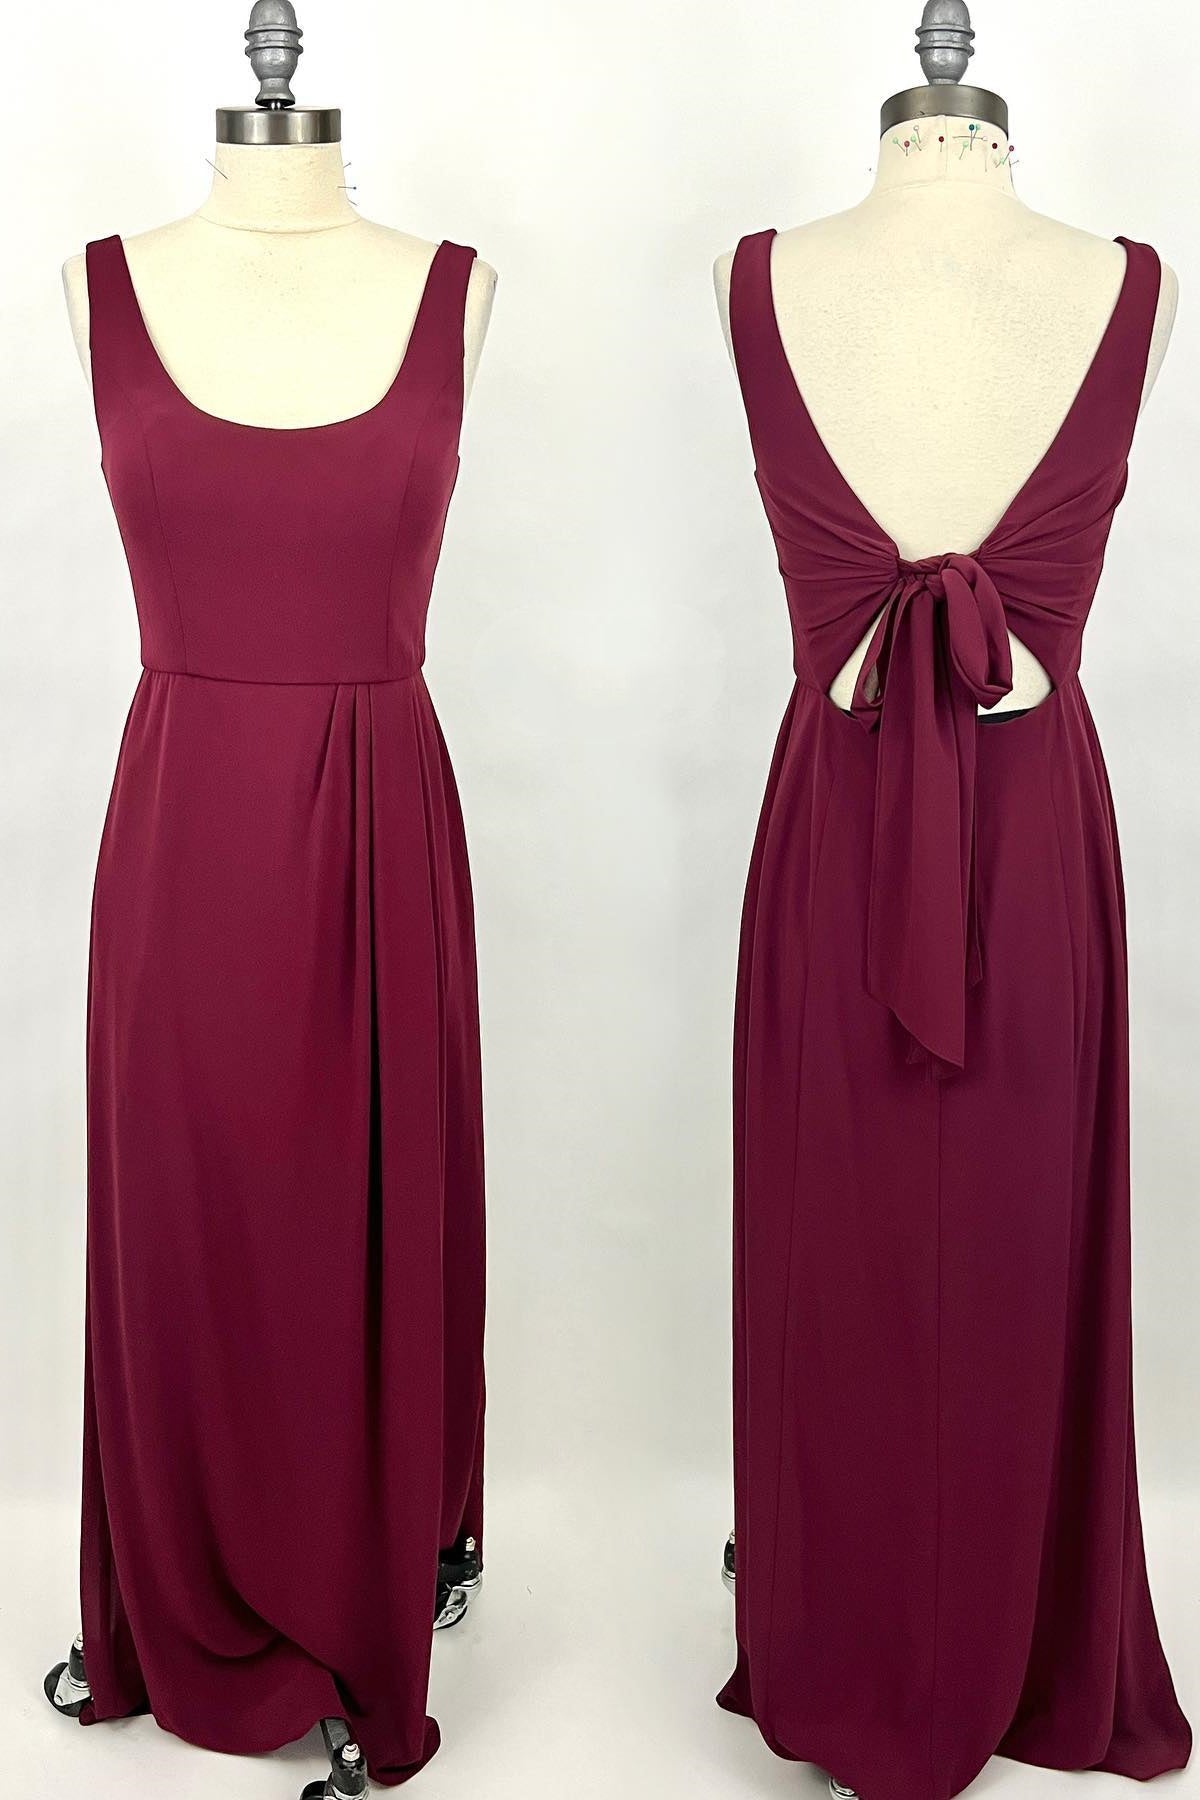 Prom Dress Backless, Simple Wine Red Scoop Long Bridesmaid Dress